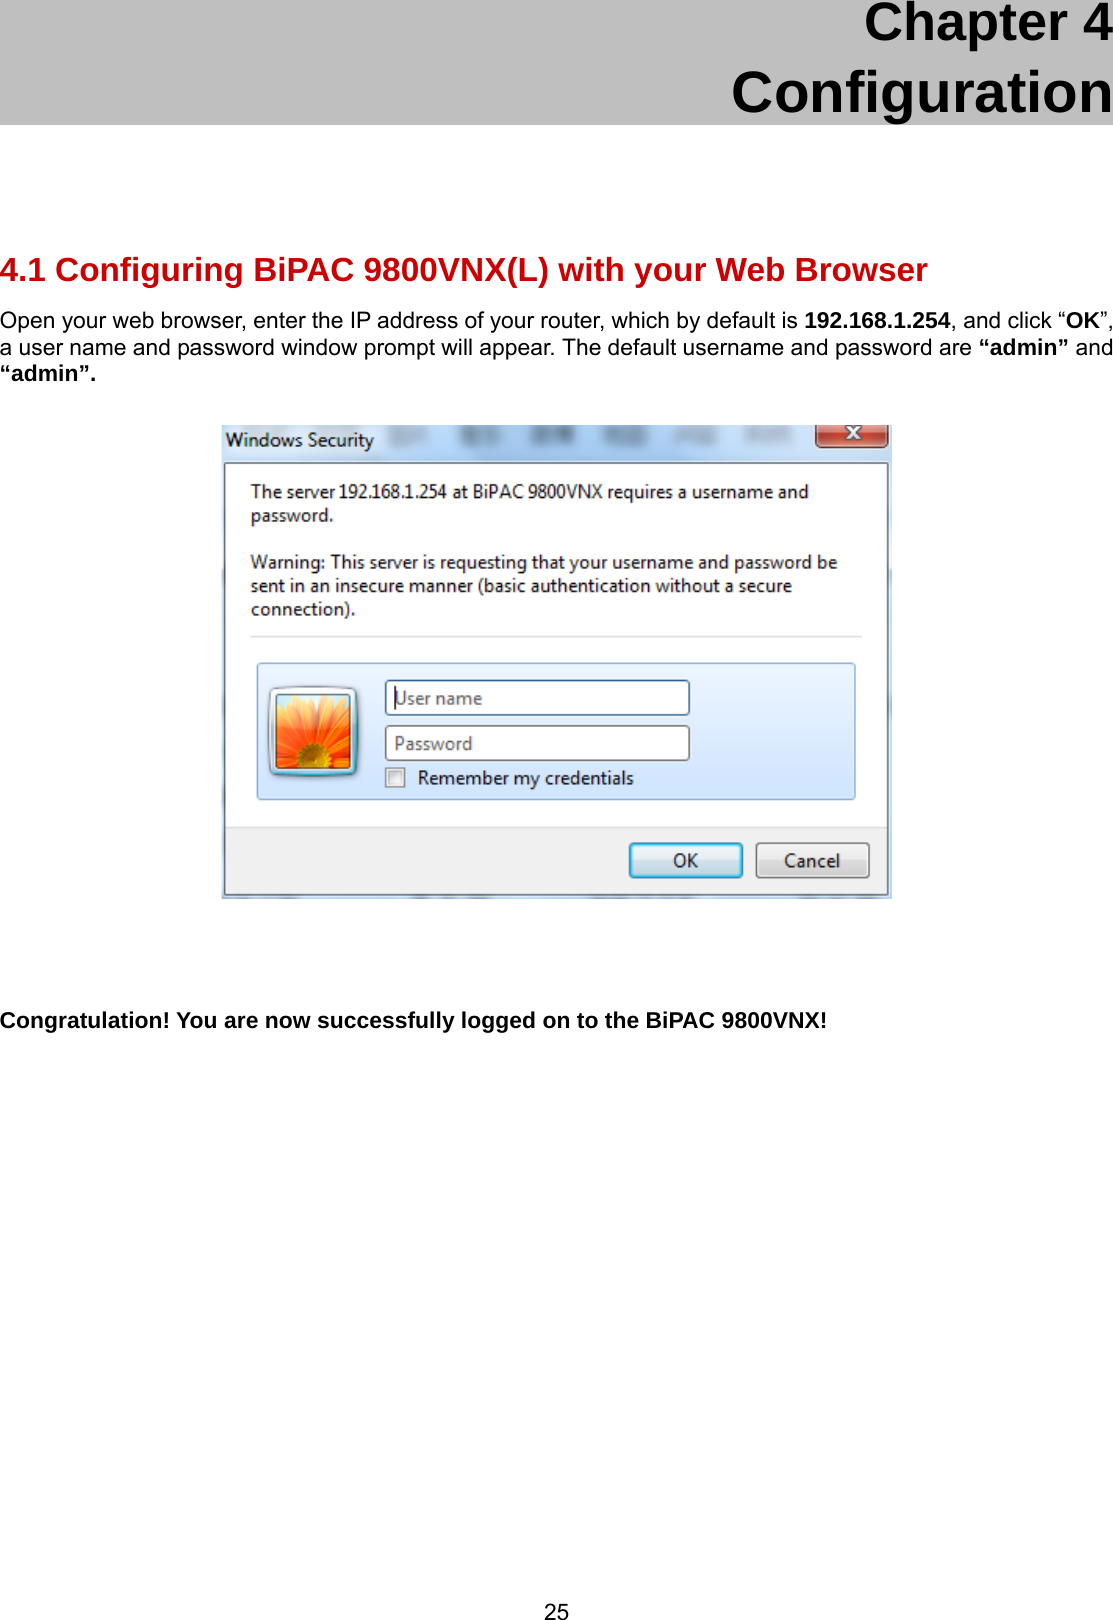 25 Chapter 4    Configuration  4.1 Configuring BiPAC 9800VNX(L) with your Web Browser Open your web browser, enter the IP address of your router, which by default is 192.168.1.254, and click “OK”, a user name and password window prompt will appear. The default username and password are “admin” and “admin”.       Congratulation! You are now successfully logged on to the BiPAC 9800VNX!  